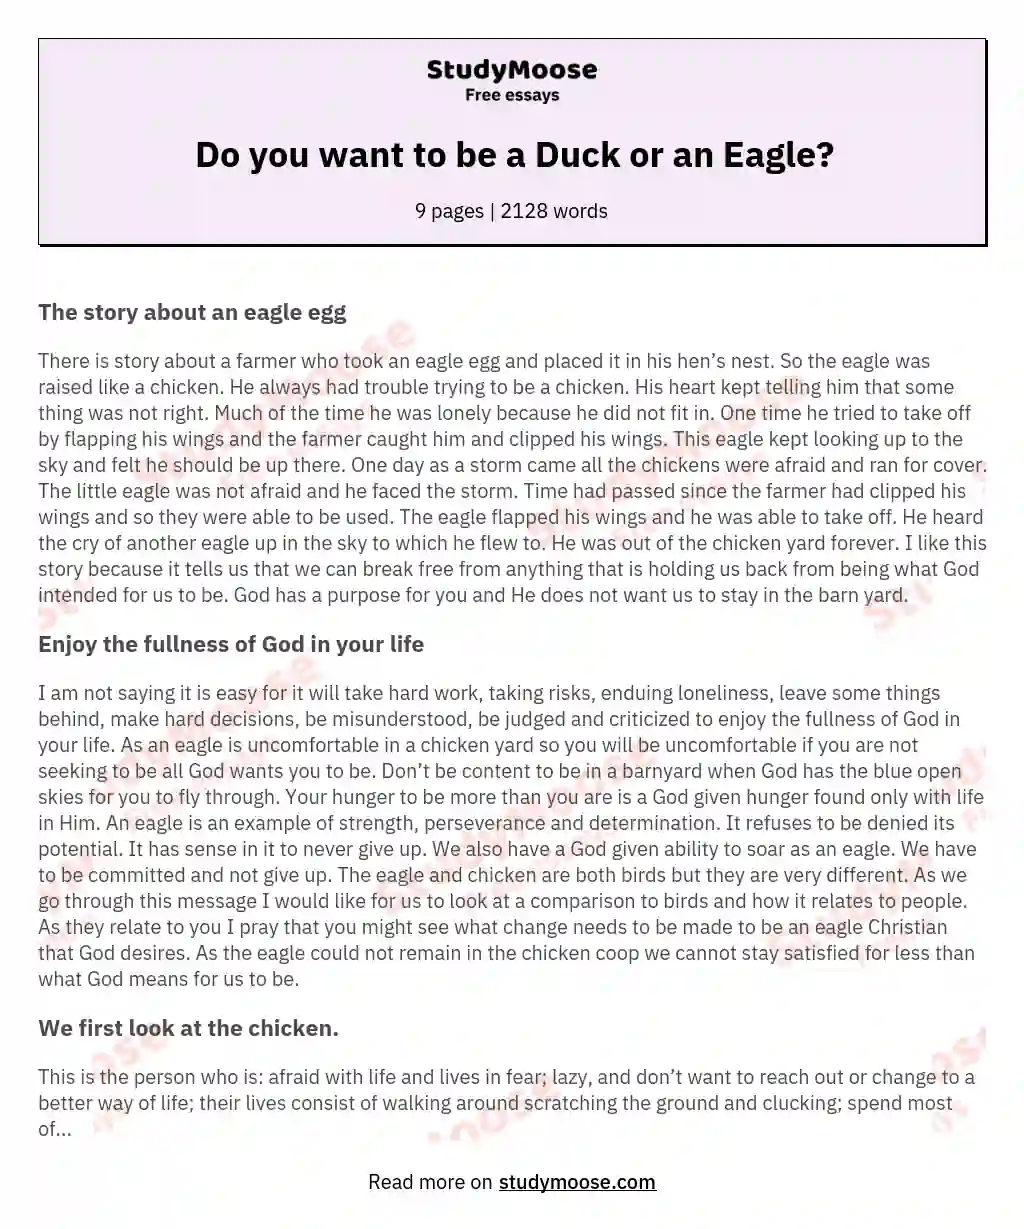 Do you want to be a Duck or an Eagle?